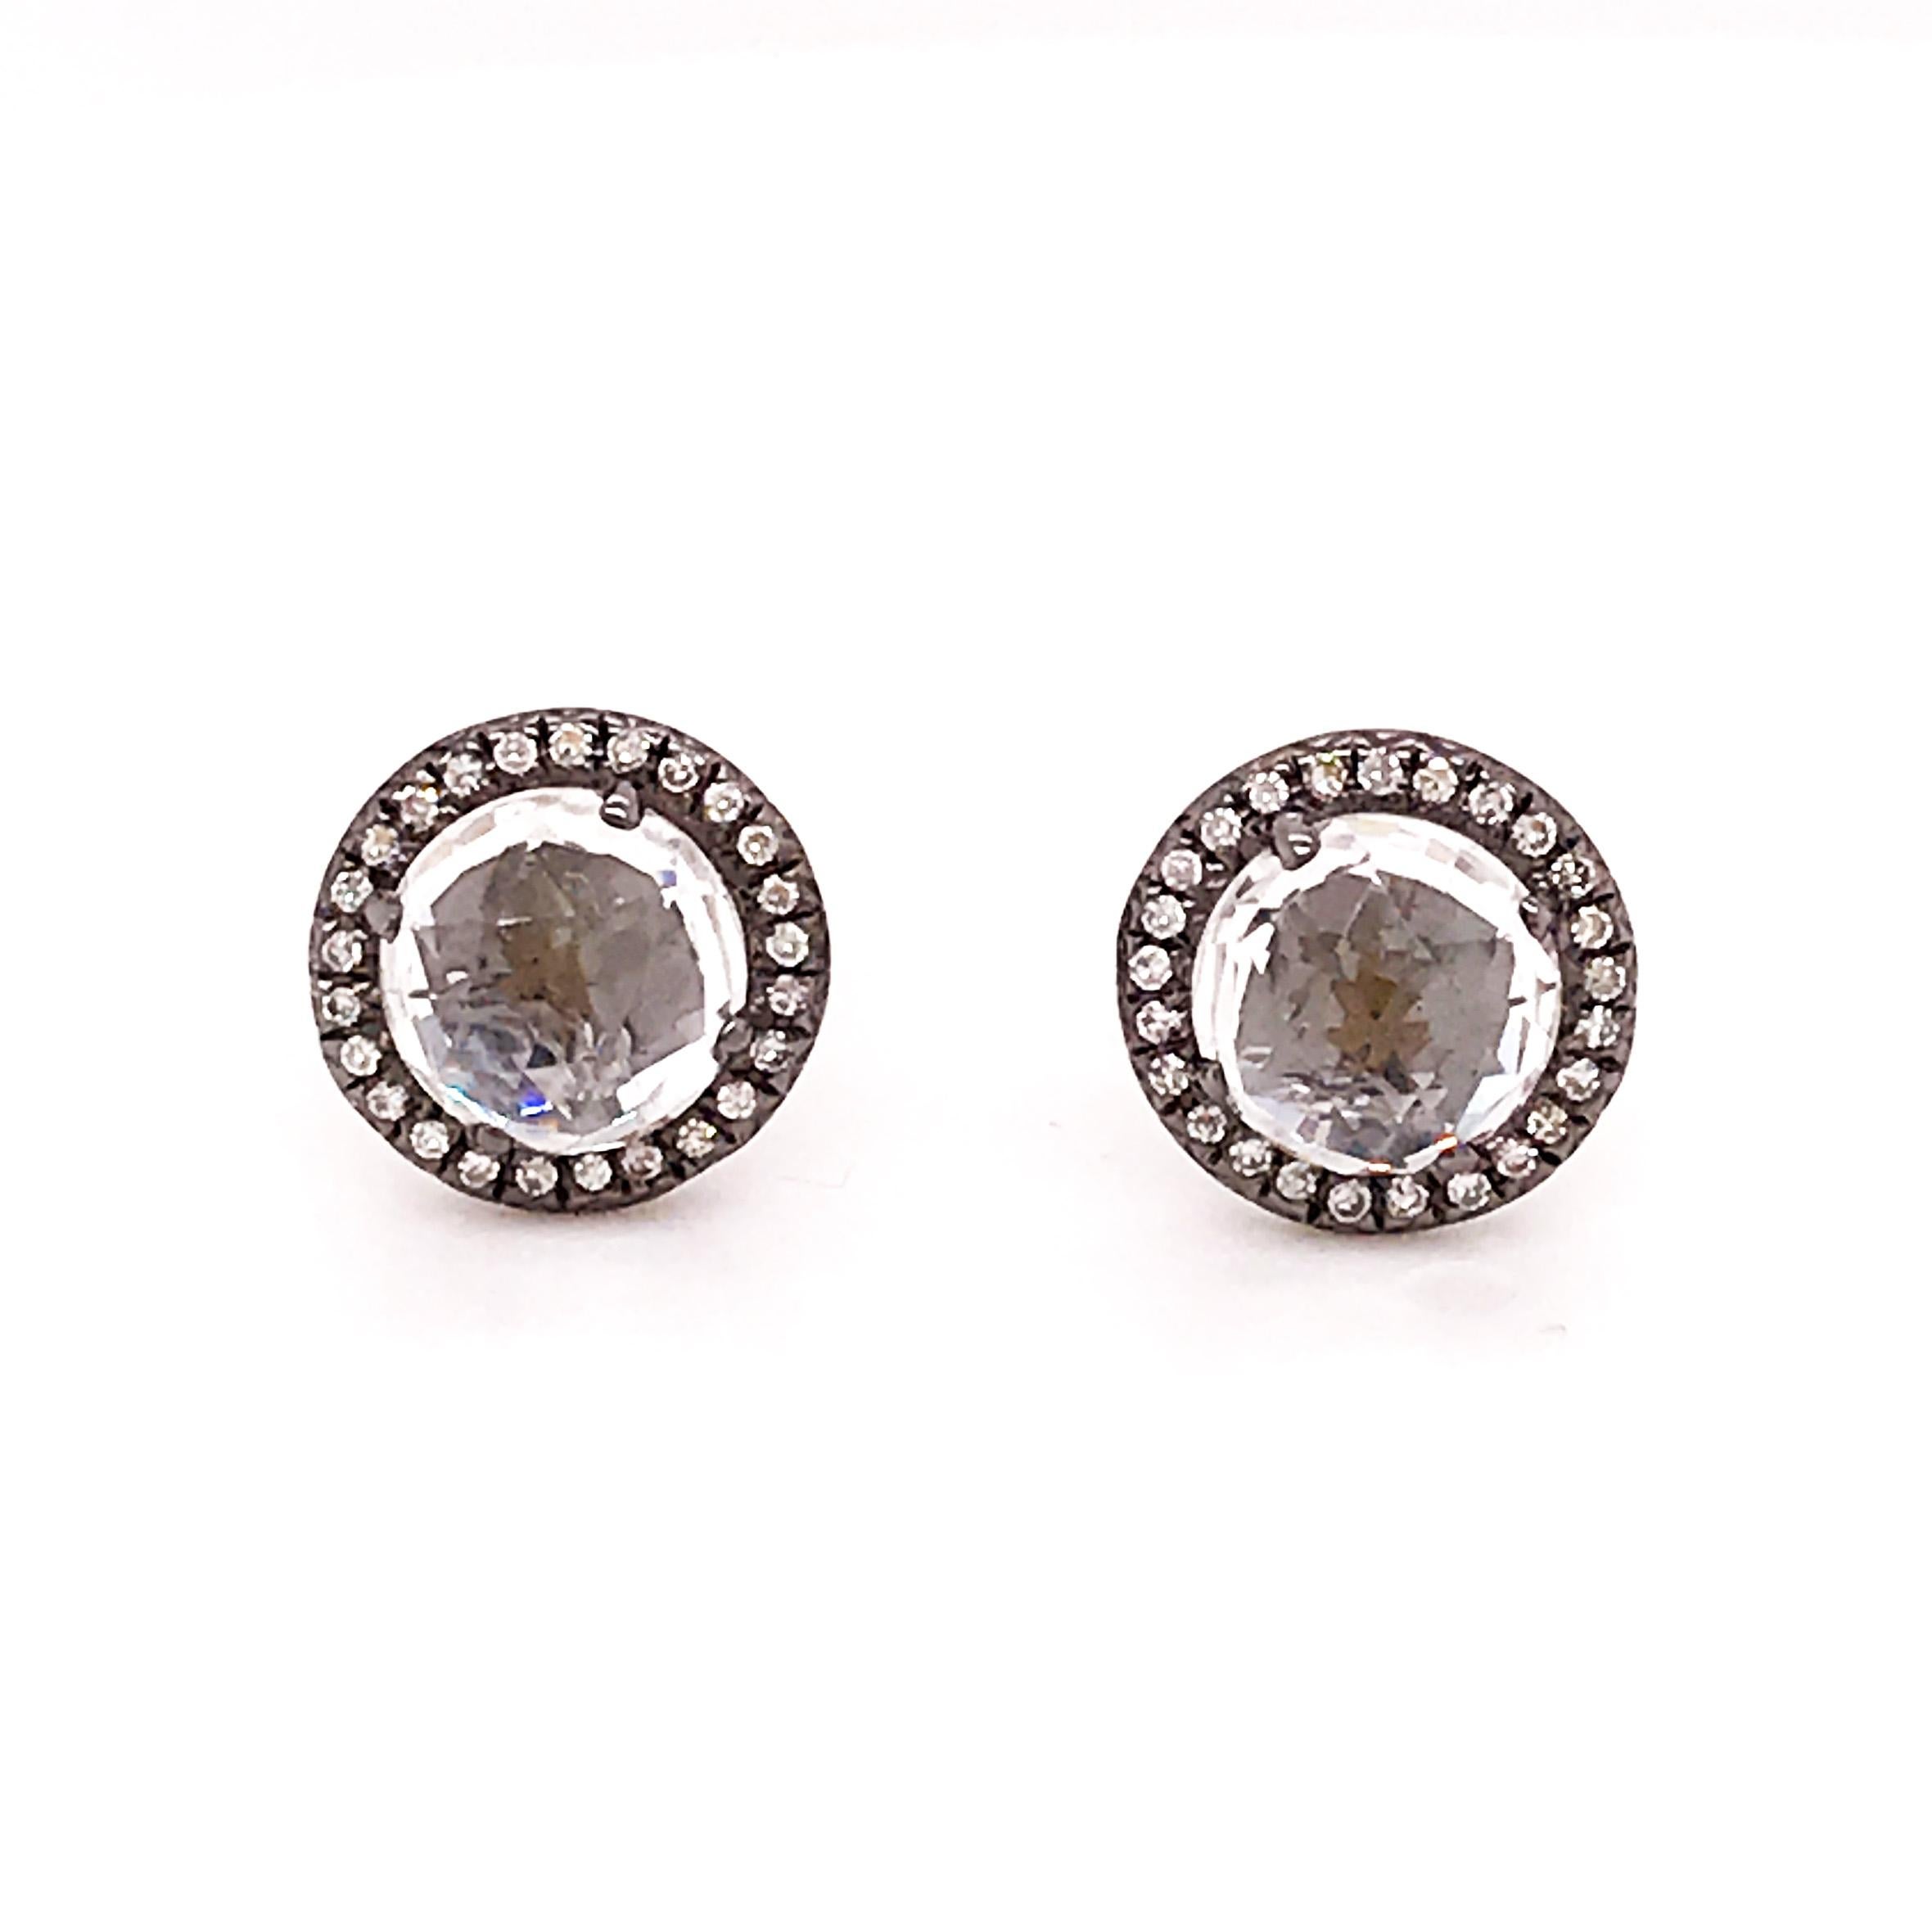 The white topaz and diamond stud earrings are a one of a kind jewelry accessory. With a uniquely cut white topaz gemstones set in the center, this gemstone has a faceted cut that reflects light from every angle. Encased in a black-white gold diamond